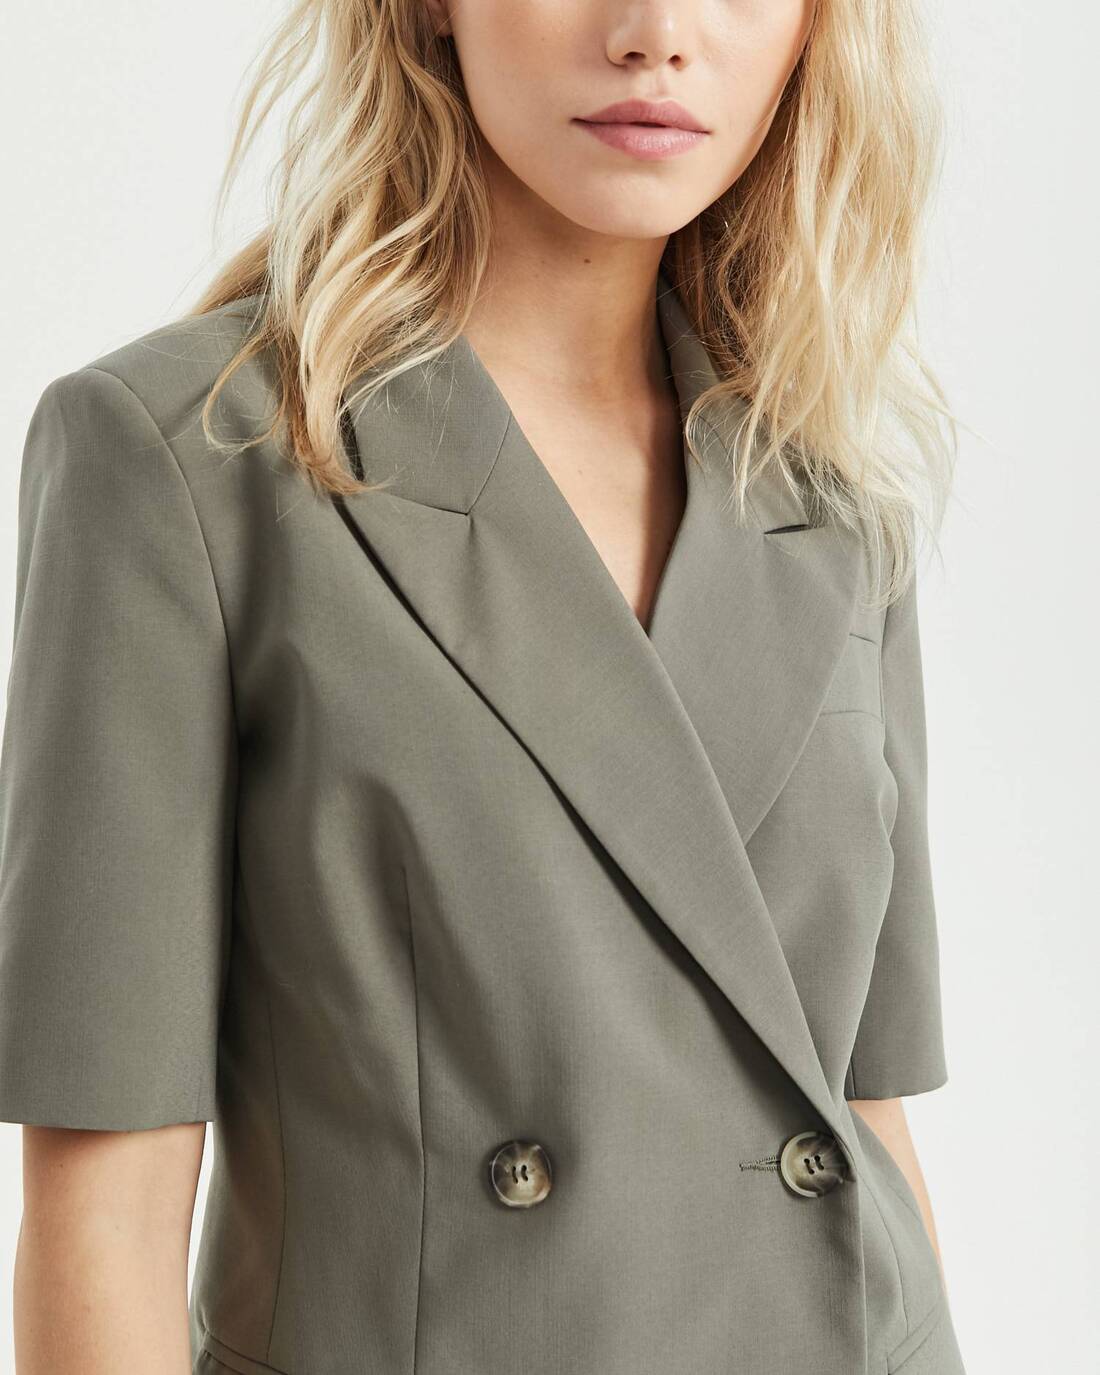 Fitted cropped sleeve jacket